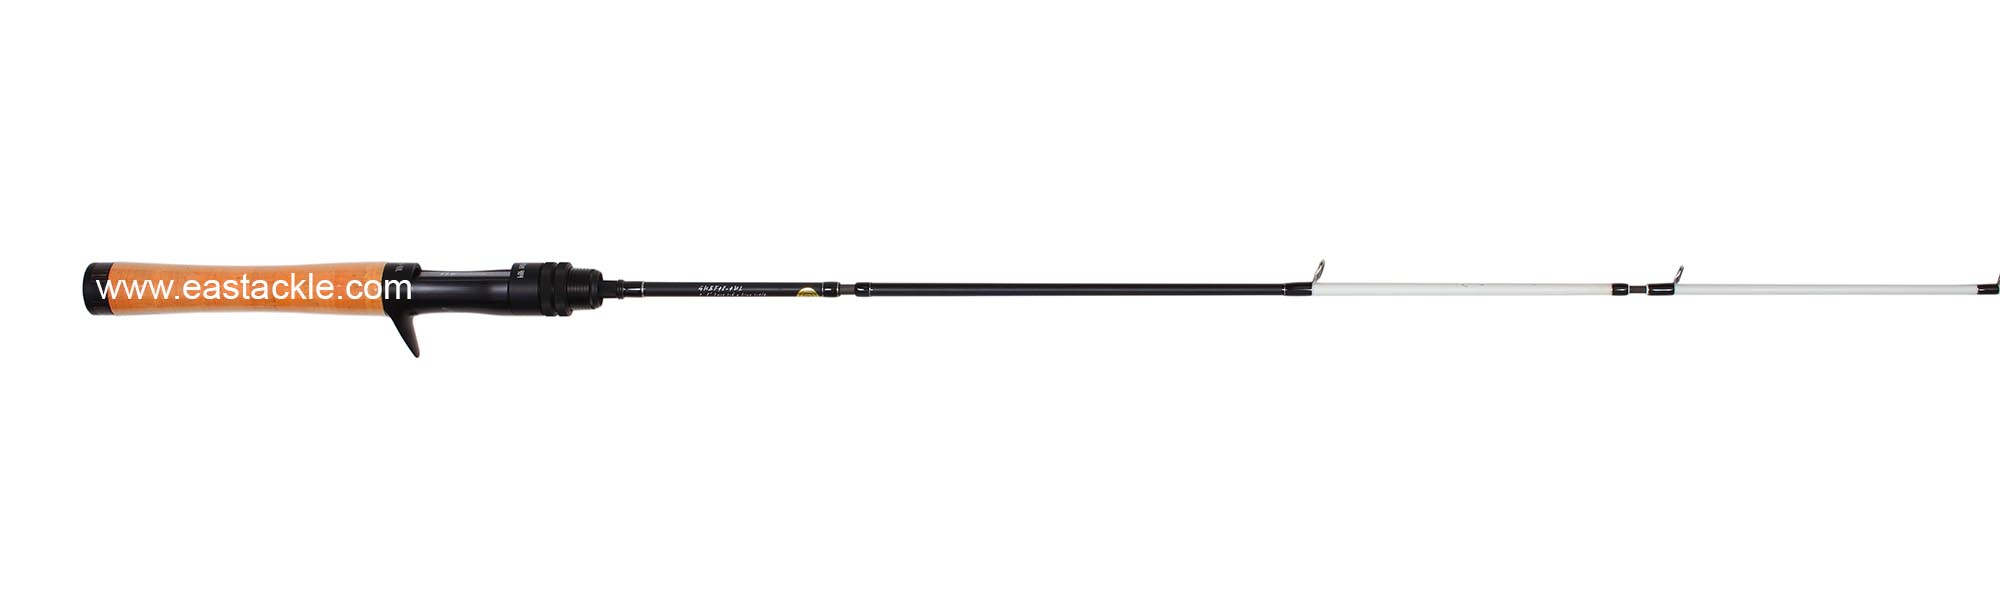 Megabass - Great Hunting - GHBF 48-4 UL - Bait Casting Rod - Rear Grip to Mid Section (Side View) | Eastackle